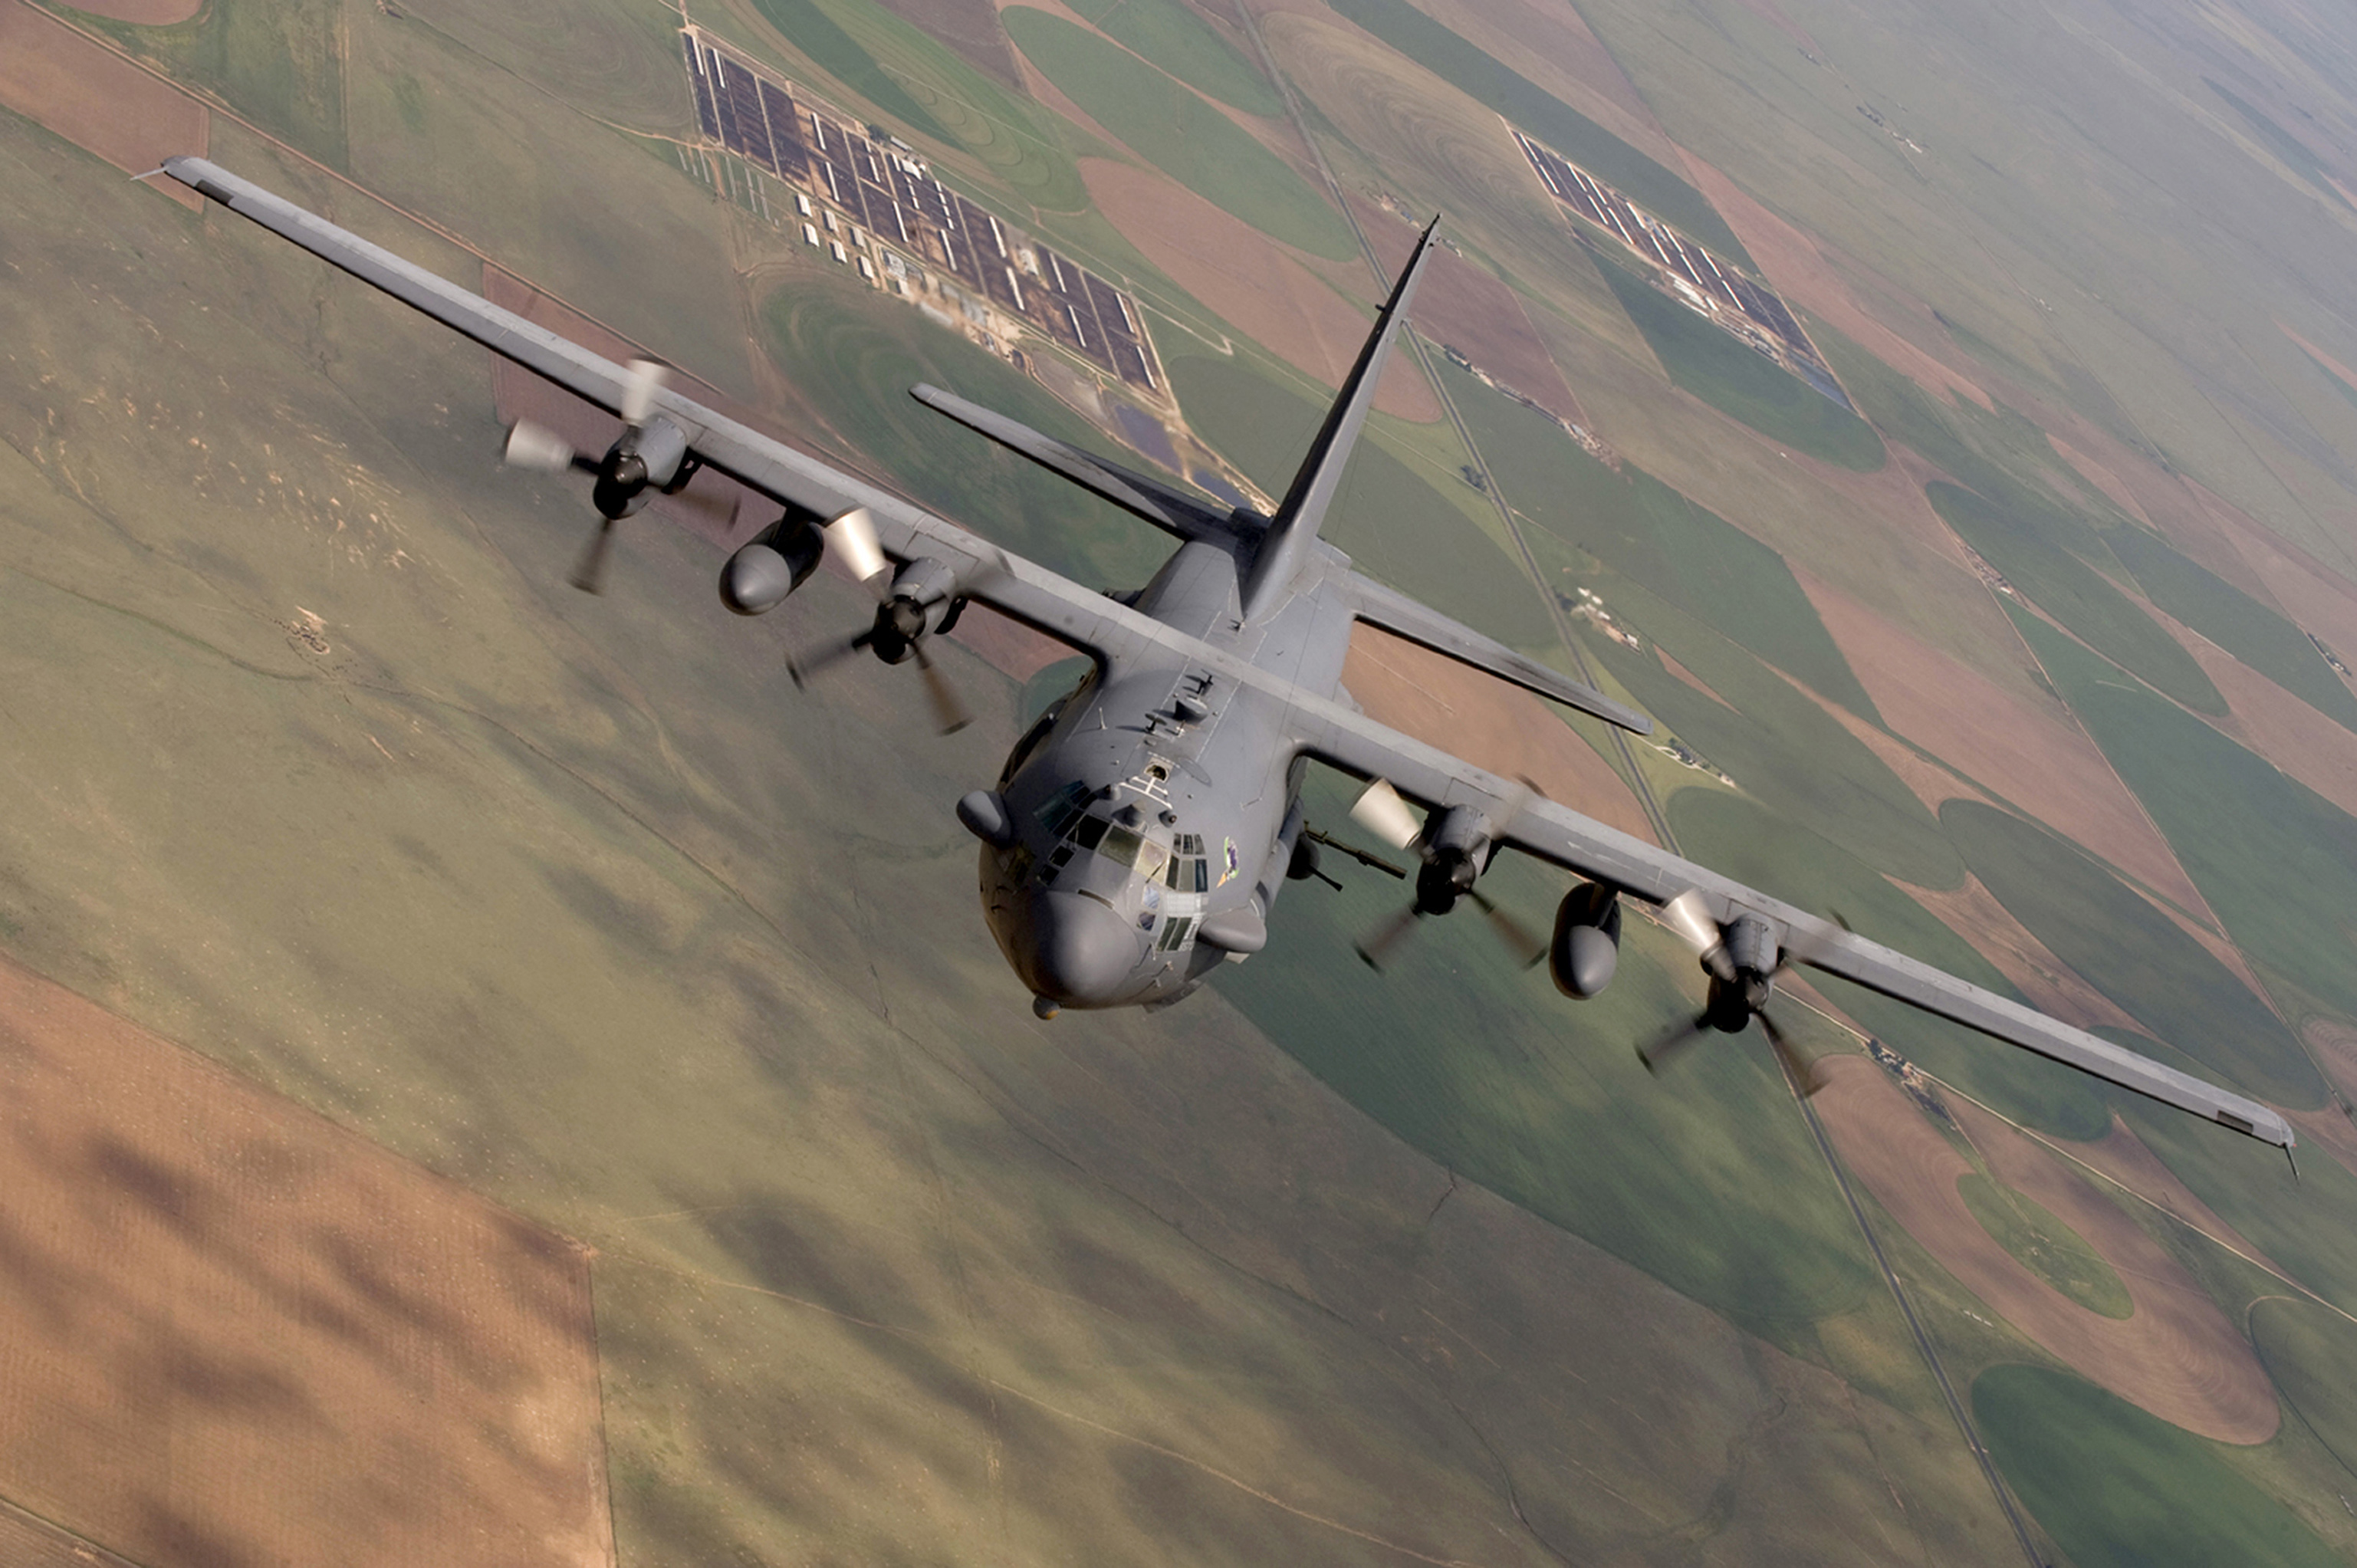 This photo provided by the U.S. Air Force, taken Aug. 11, 2010, shows an AC-130 Spectre from the 16th Special Operations Squadron flying a training mission at Cannon Air Force Base, N. M. The Army Green Berets who called in the deadly strike on the Doctors without Borders trauma center in Afghanistan were aware it was a functioning hospital but believed it was under Taliban control, raising questions about whether the air strike violated international law. (U.S. Air Force photo/Master Sgt. Jack Braden via AP)